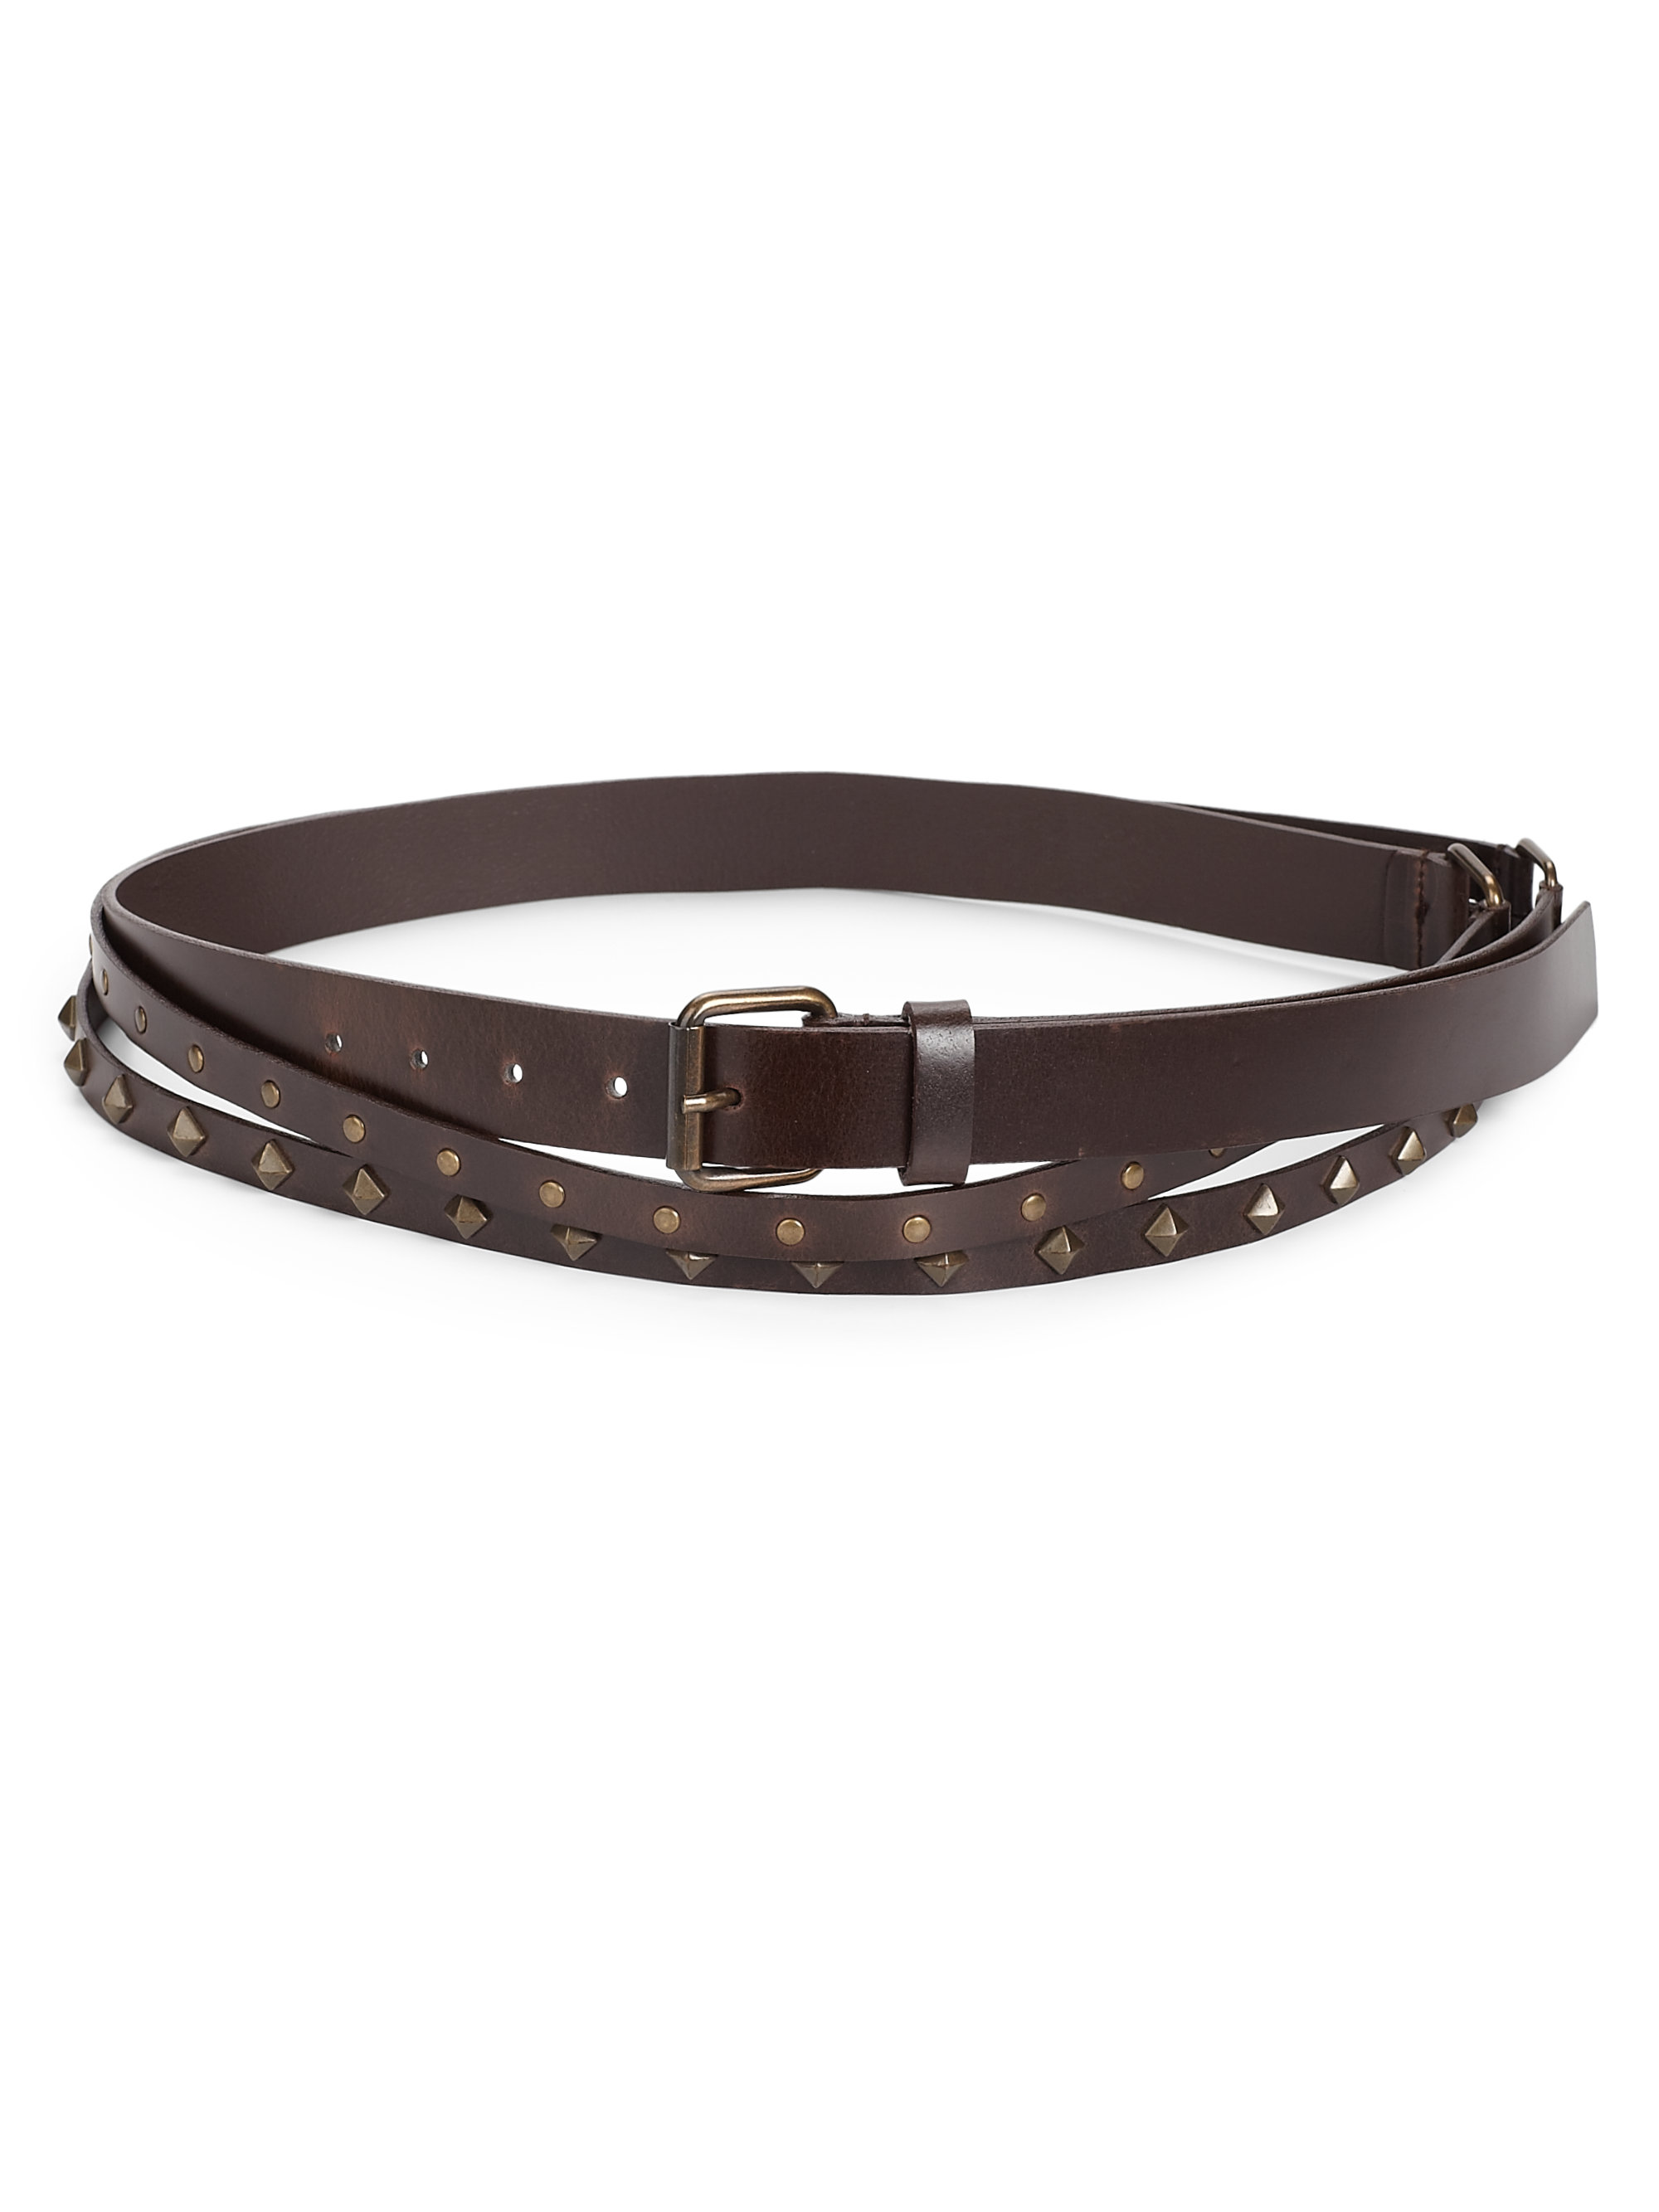 Lyst - Max Mara Studded Leather Wrap Belt in Brown